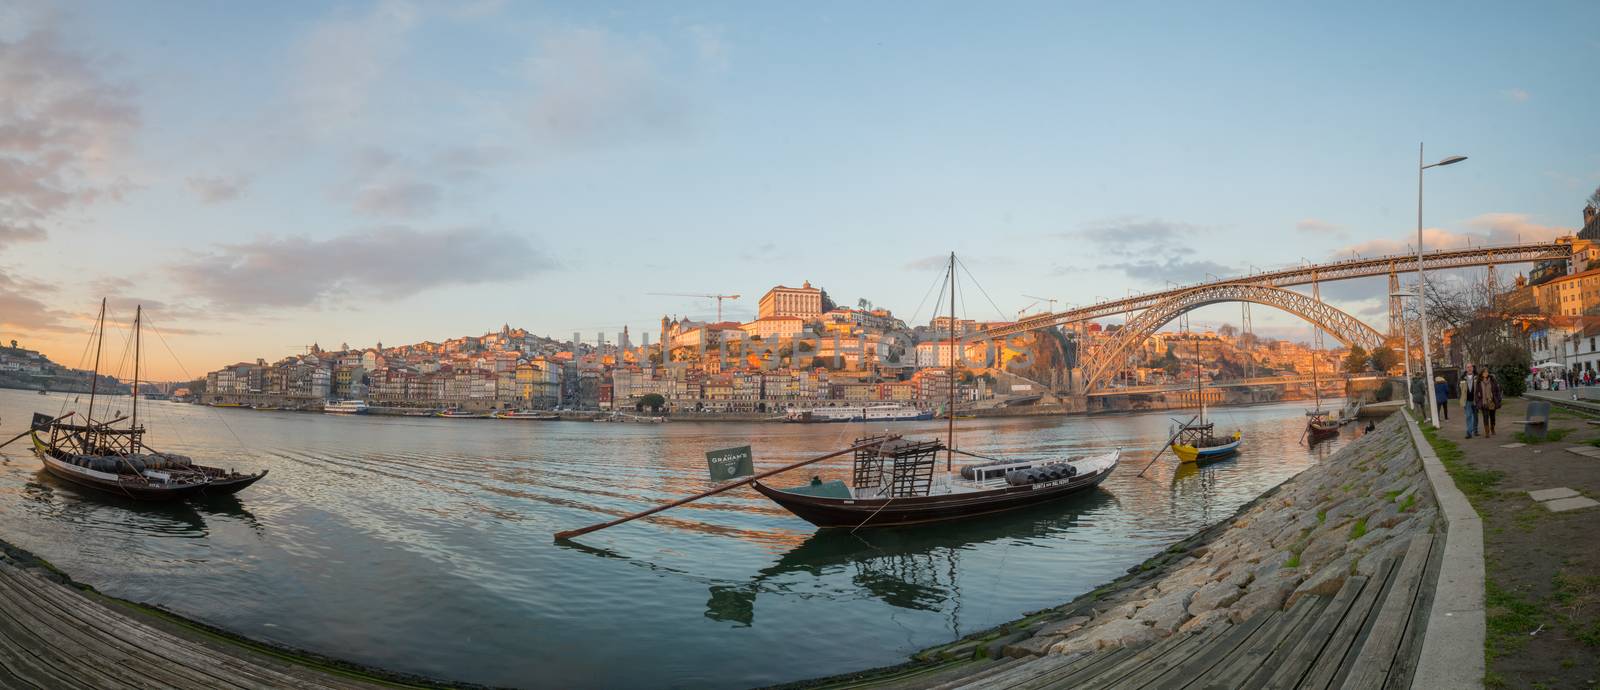 PORTO, PORTUGAL - DECEMBER 24, 2017: Panoramic view at sunset of the Douro river, Dom Luis I Bridge and the Ribeira (riverside), with various boats, locals and visitors, in Porto, Portugal